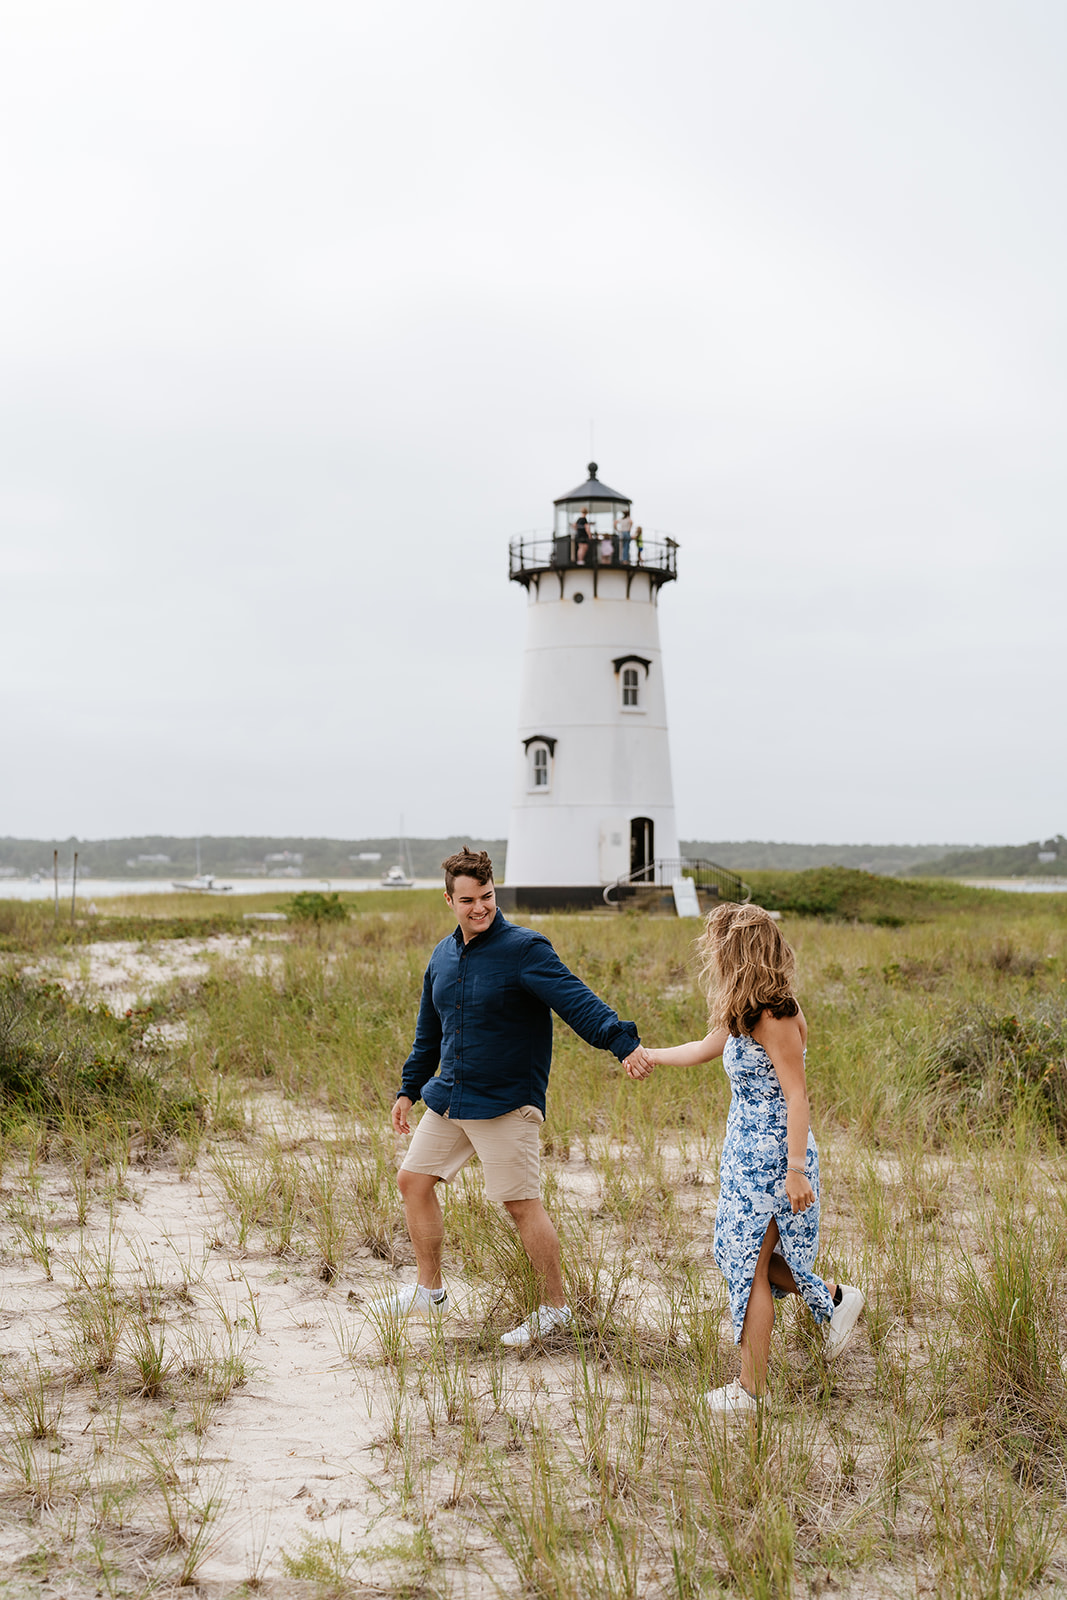 A couple kissing on a sandy beach with Edgartown Harbor Lighthouse  in the background. the woman wears a blue dress and the man a navy sweater and beige shorts.